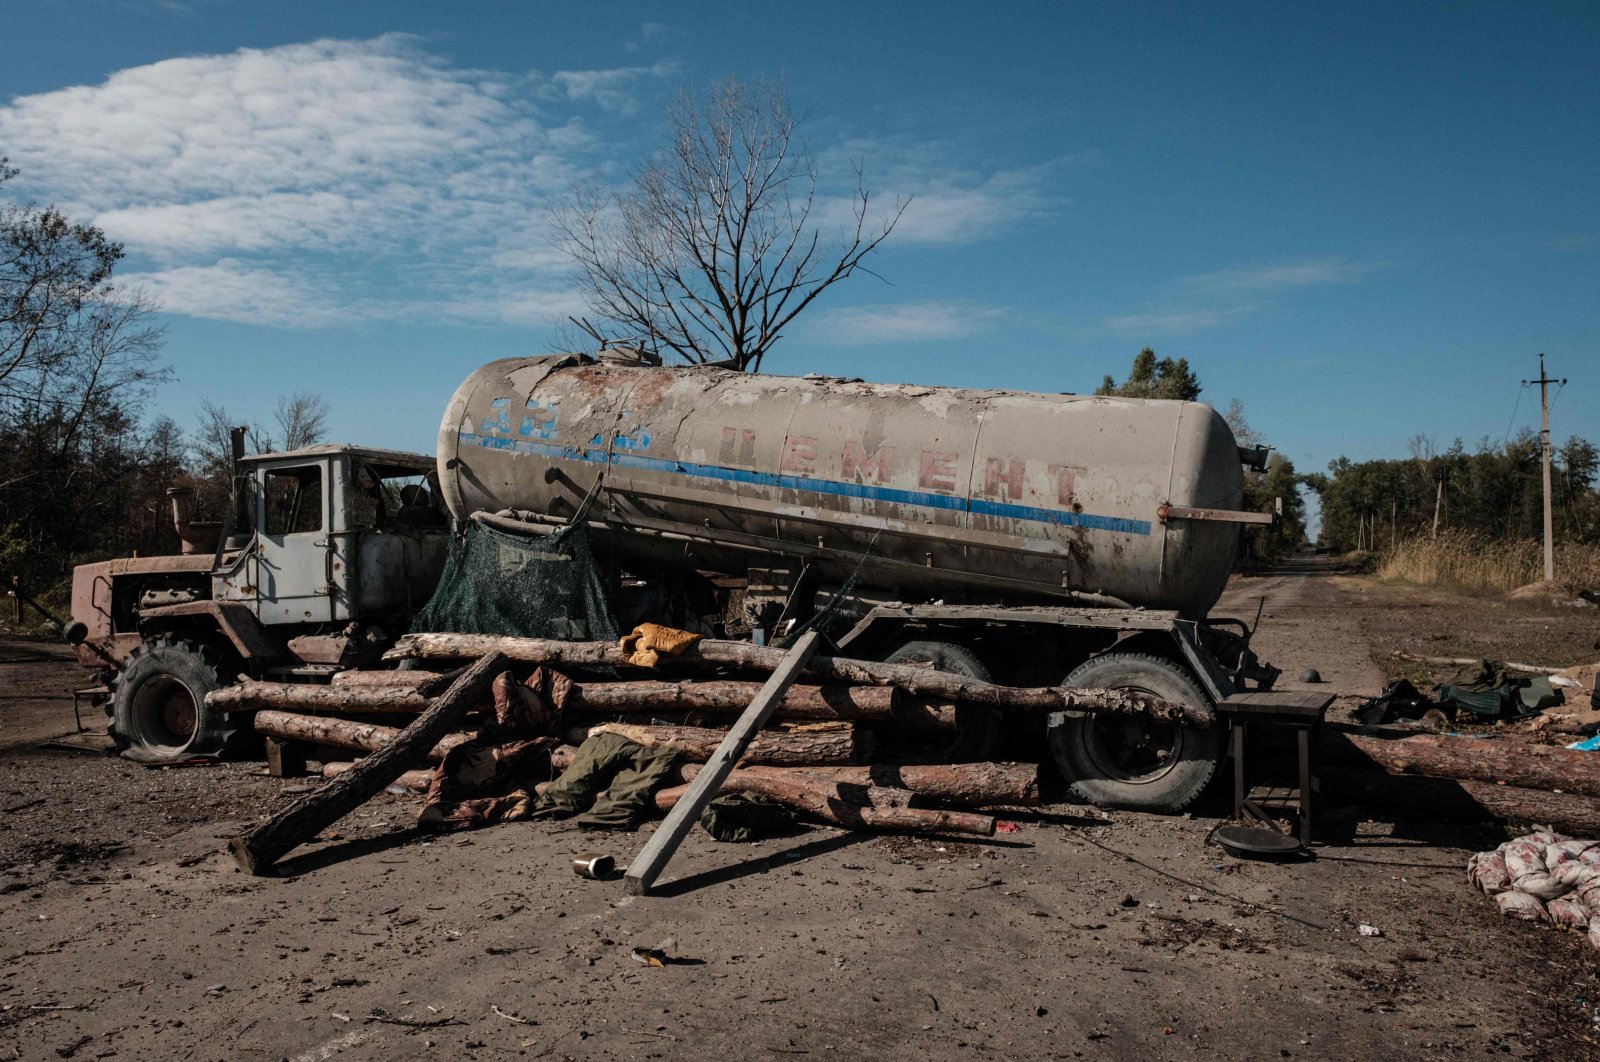 A destroyed oil truck, once used by Russian forces to block a road at a checkpoint during the occupation, is seen near the recently retaken town of Lyman in the Donetsk region, Ukraine, Oct. 6, 2022, amid the Russian invasion of Ukraine. (AFP Photo)